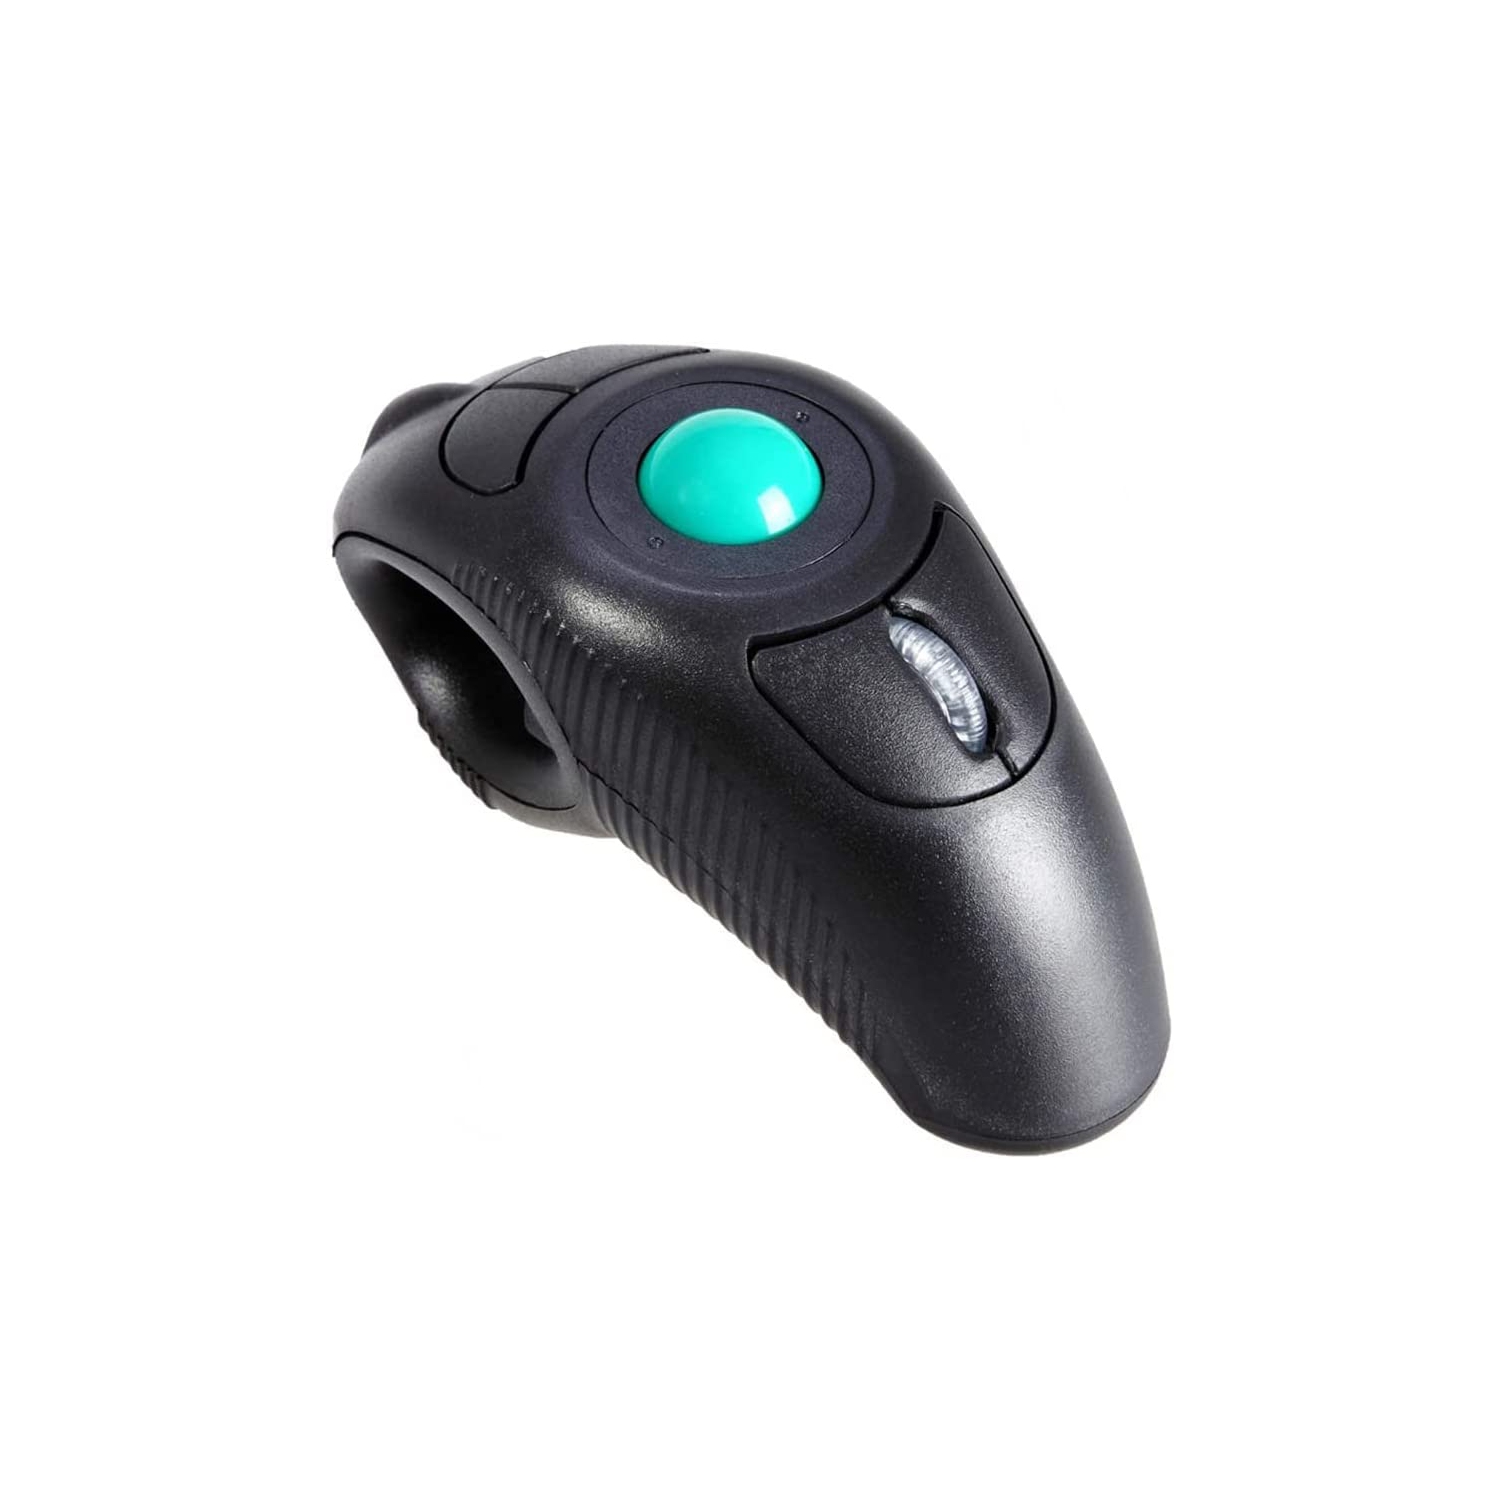 Portable Wireless Finger Handheld USB Optical Trackball Mouse for PC Laptop Mac with Laser Pointer